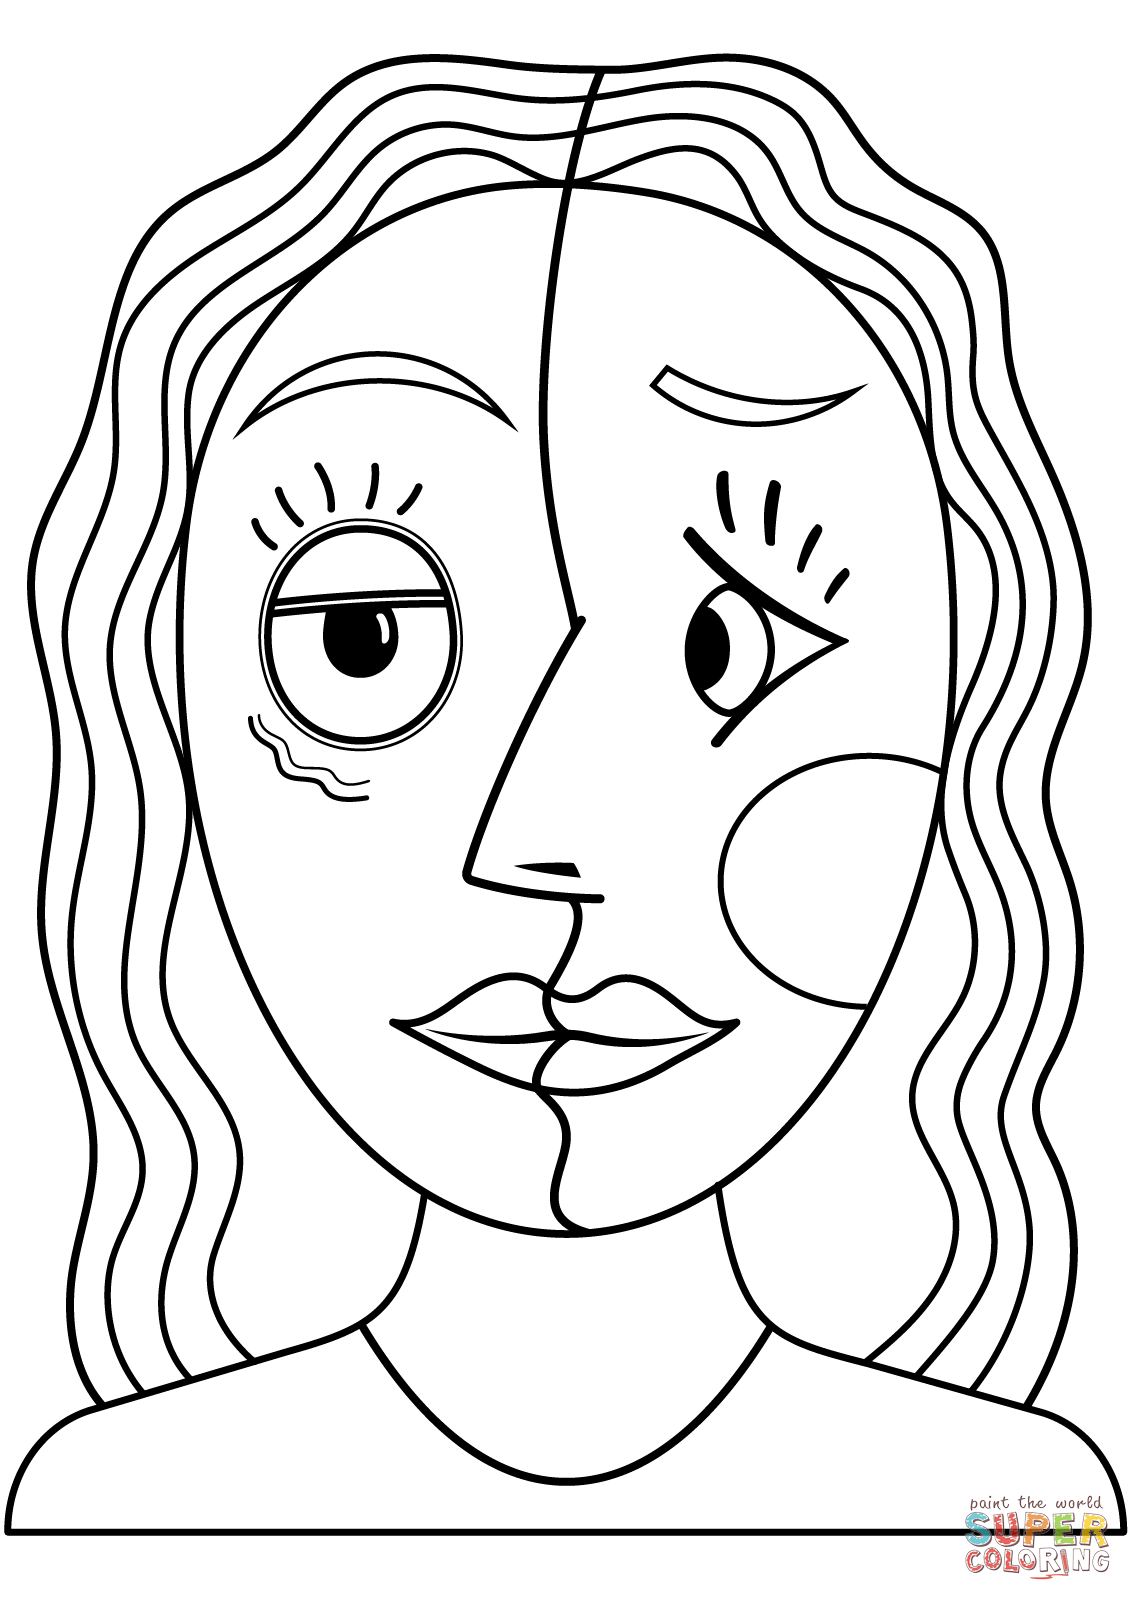 Face in the style of picasso coloring page free printable coloring pages